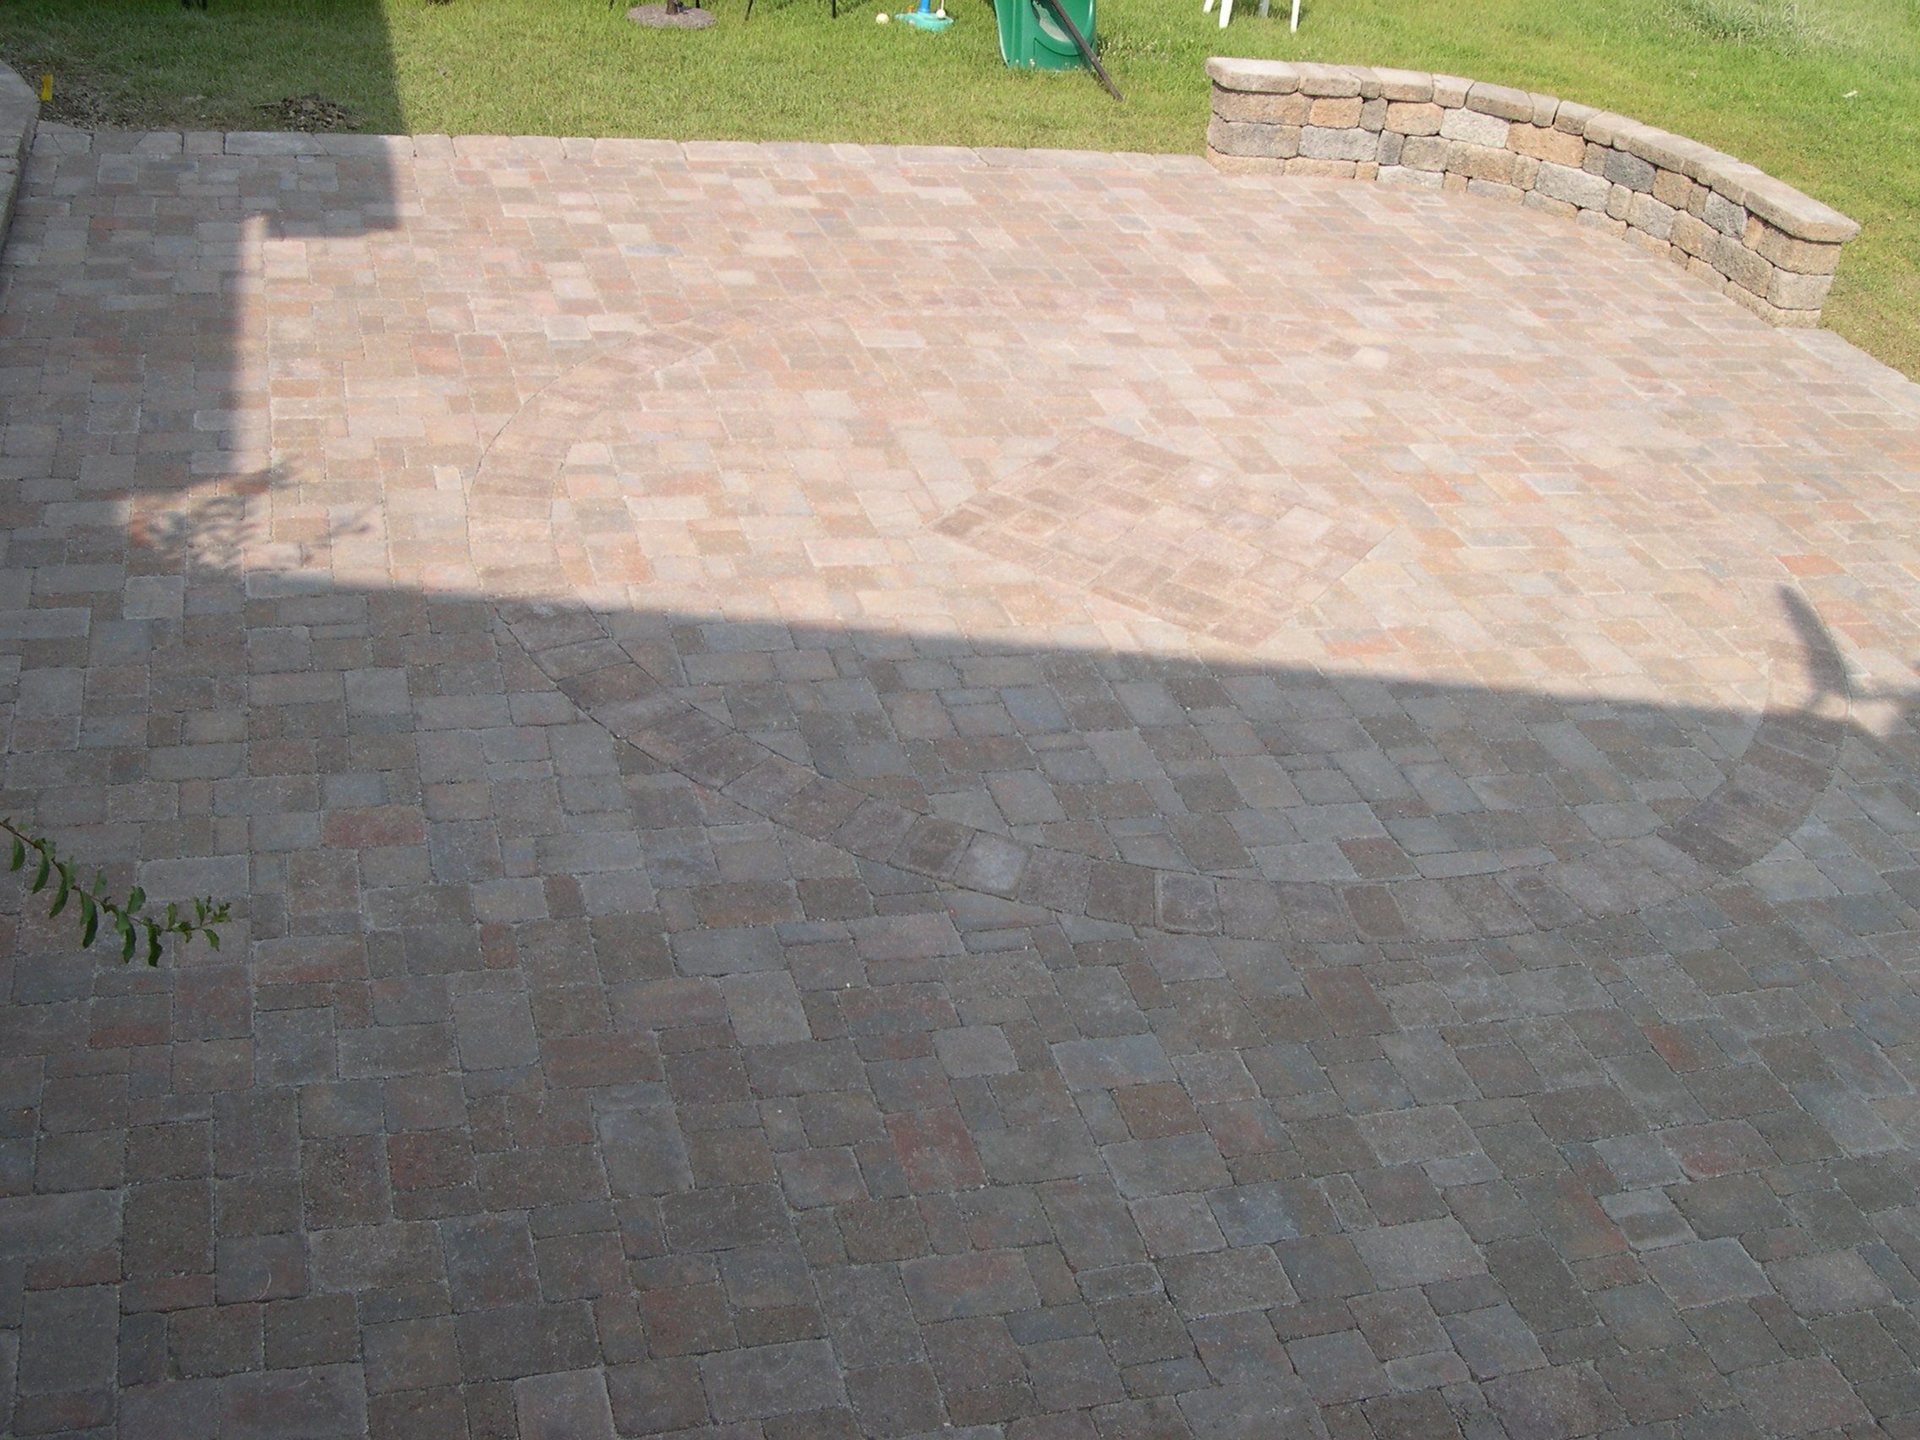 Patio pavers in the backyard of a house.